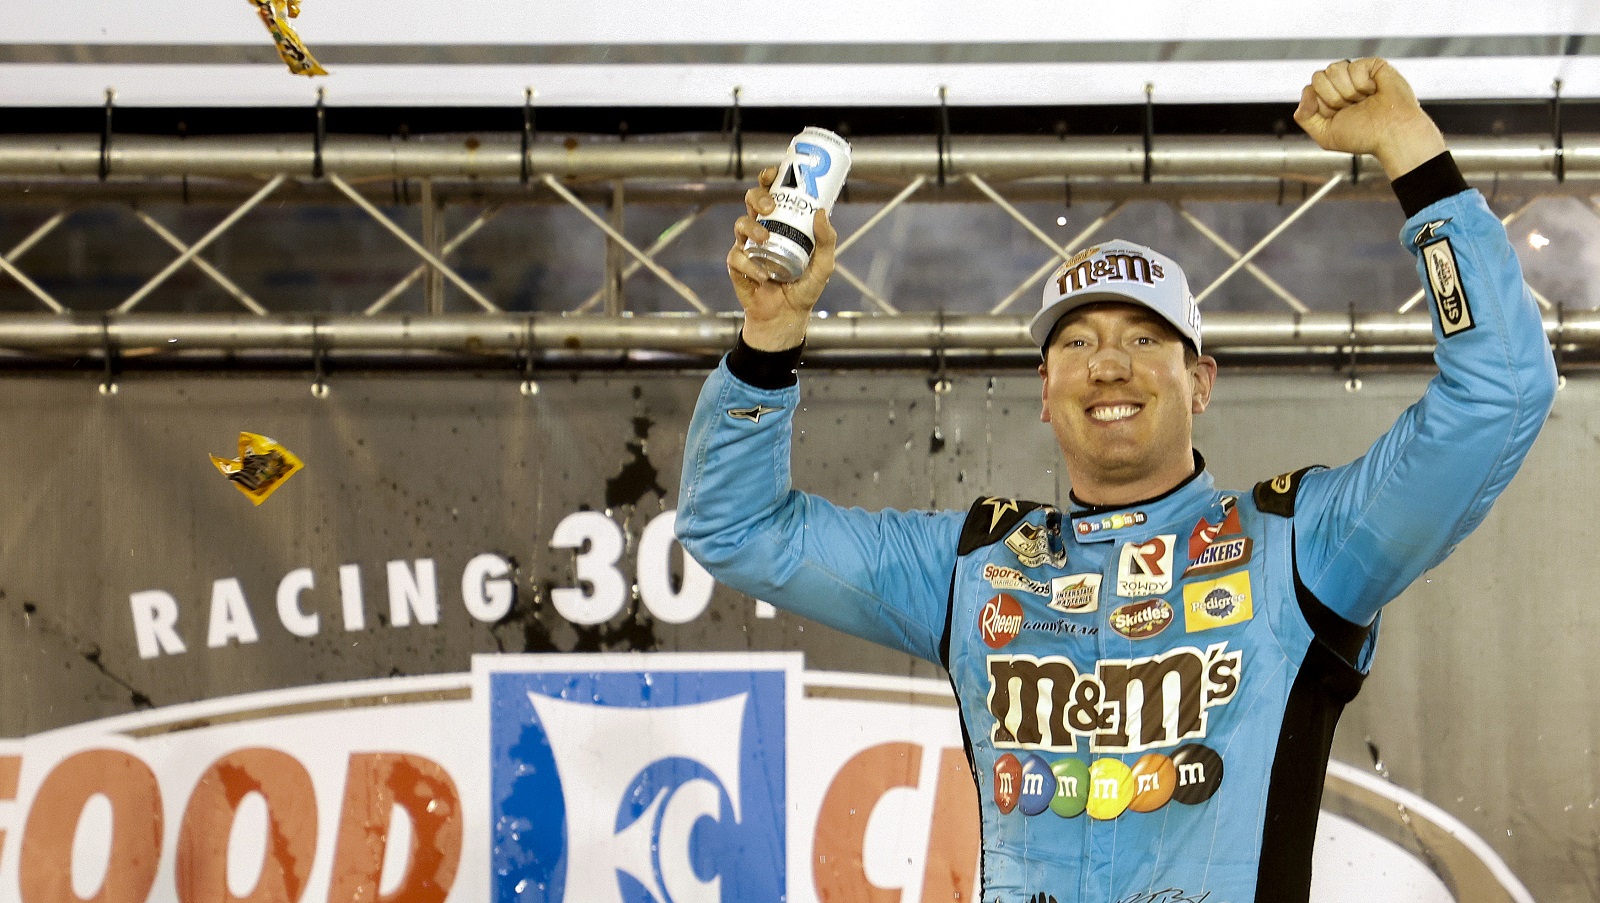 Kyle Busch celebrates in Victory Lane after winning the NASCAR Cup Series Food City Dirt Race at Bristol Motor Speedway on April 17, 2022.